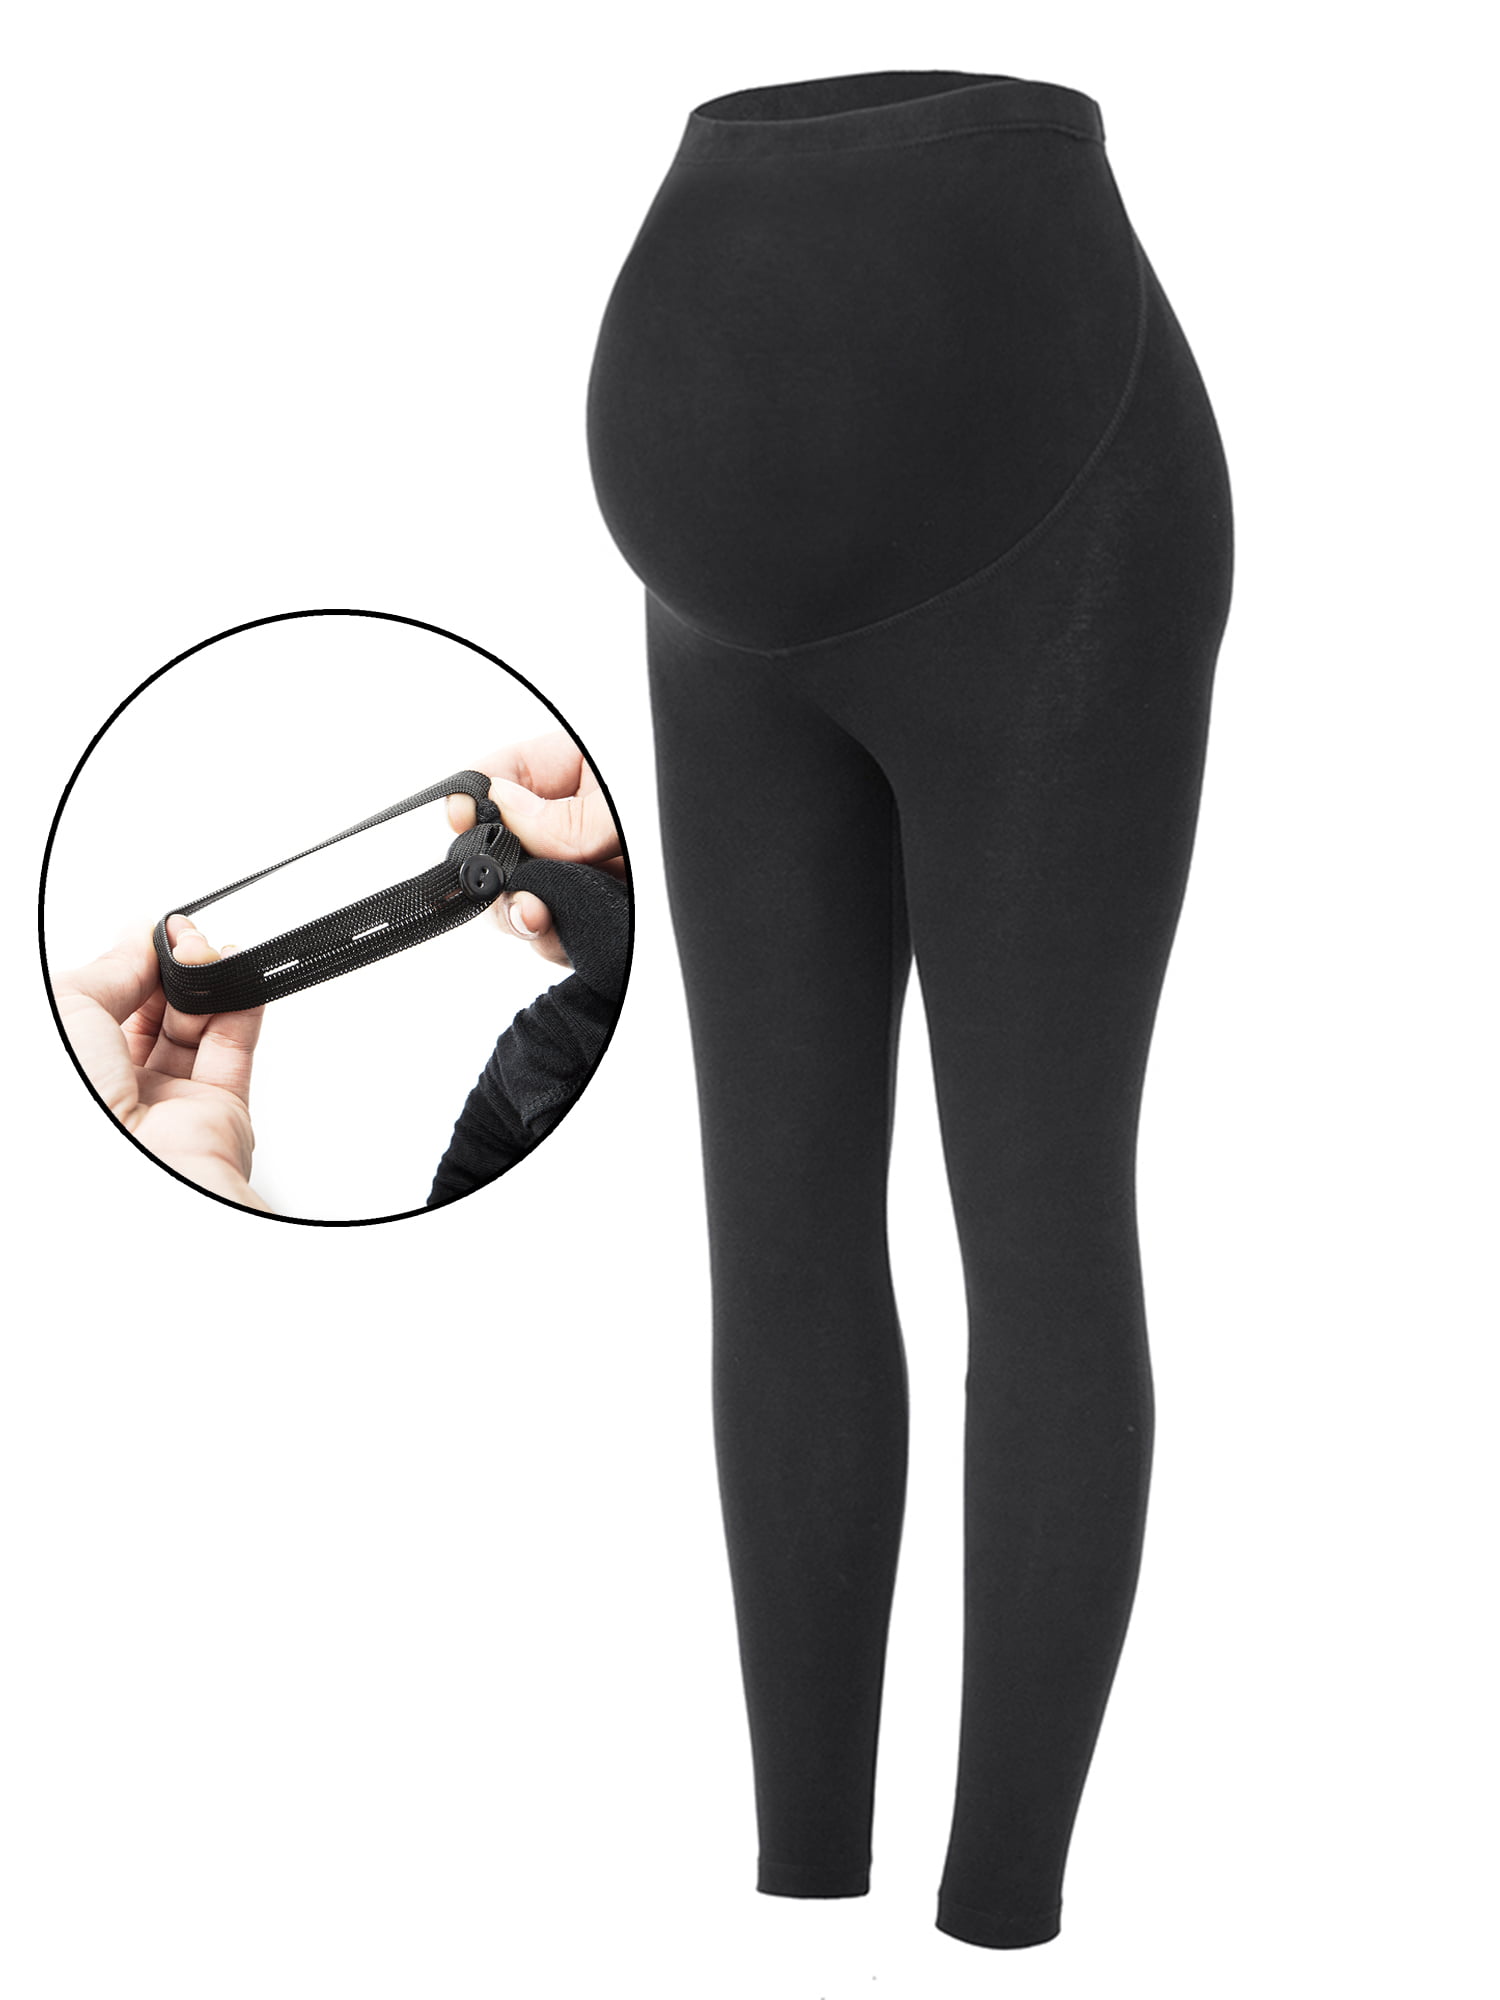 KIM S Lycra Maternity Leggings for Pregnancy Shaping and Belly Support/Non-See Thru Pregnancy Leggings Over The Bump